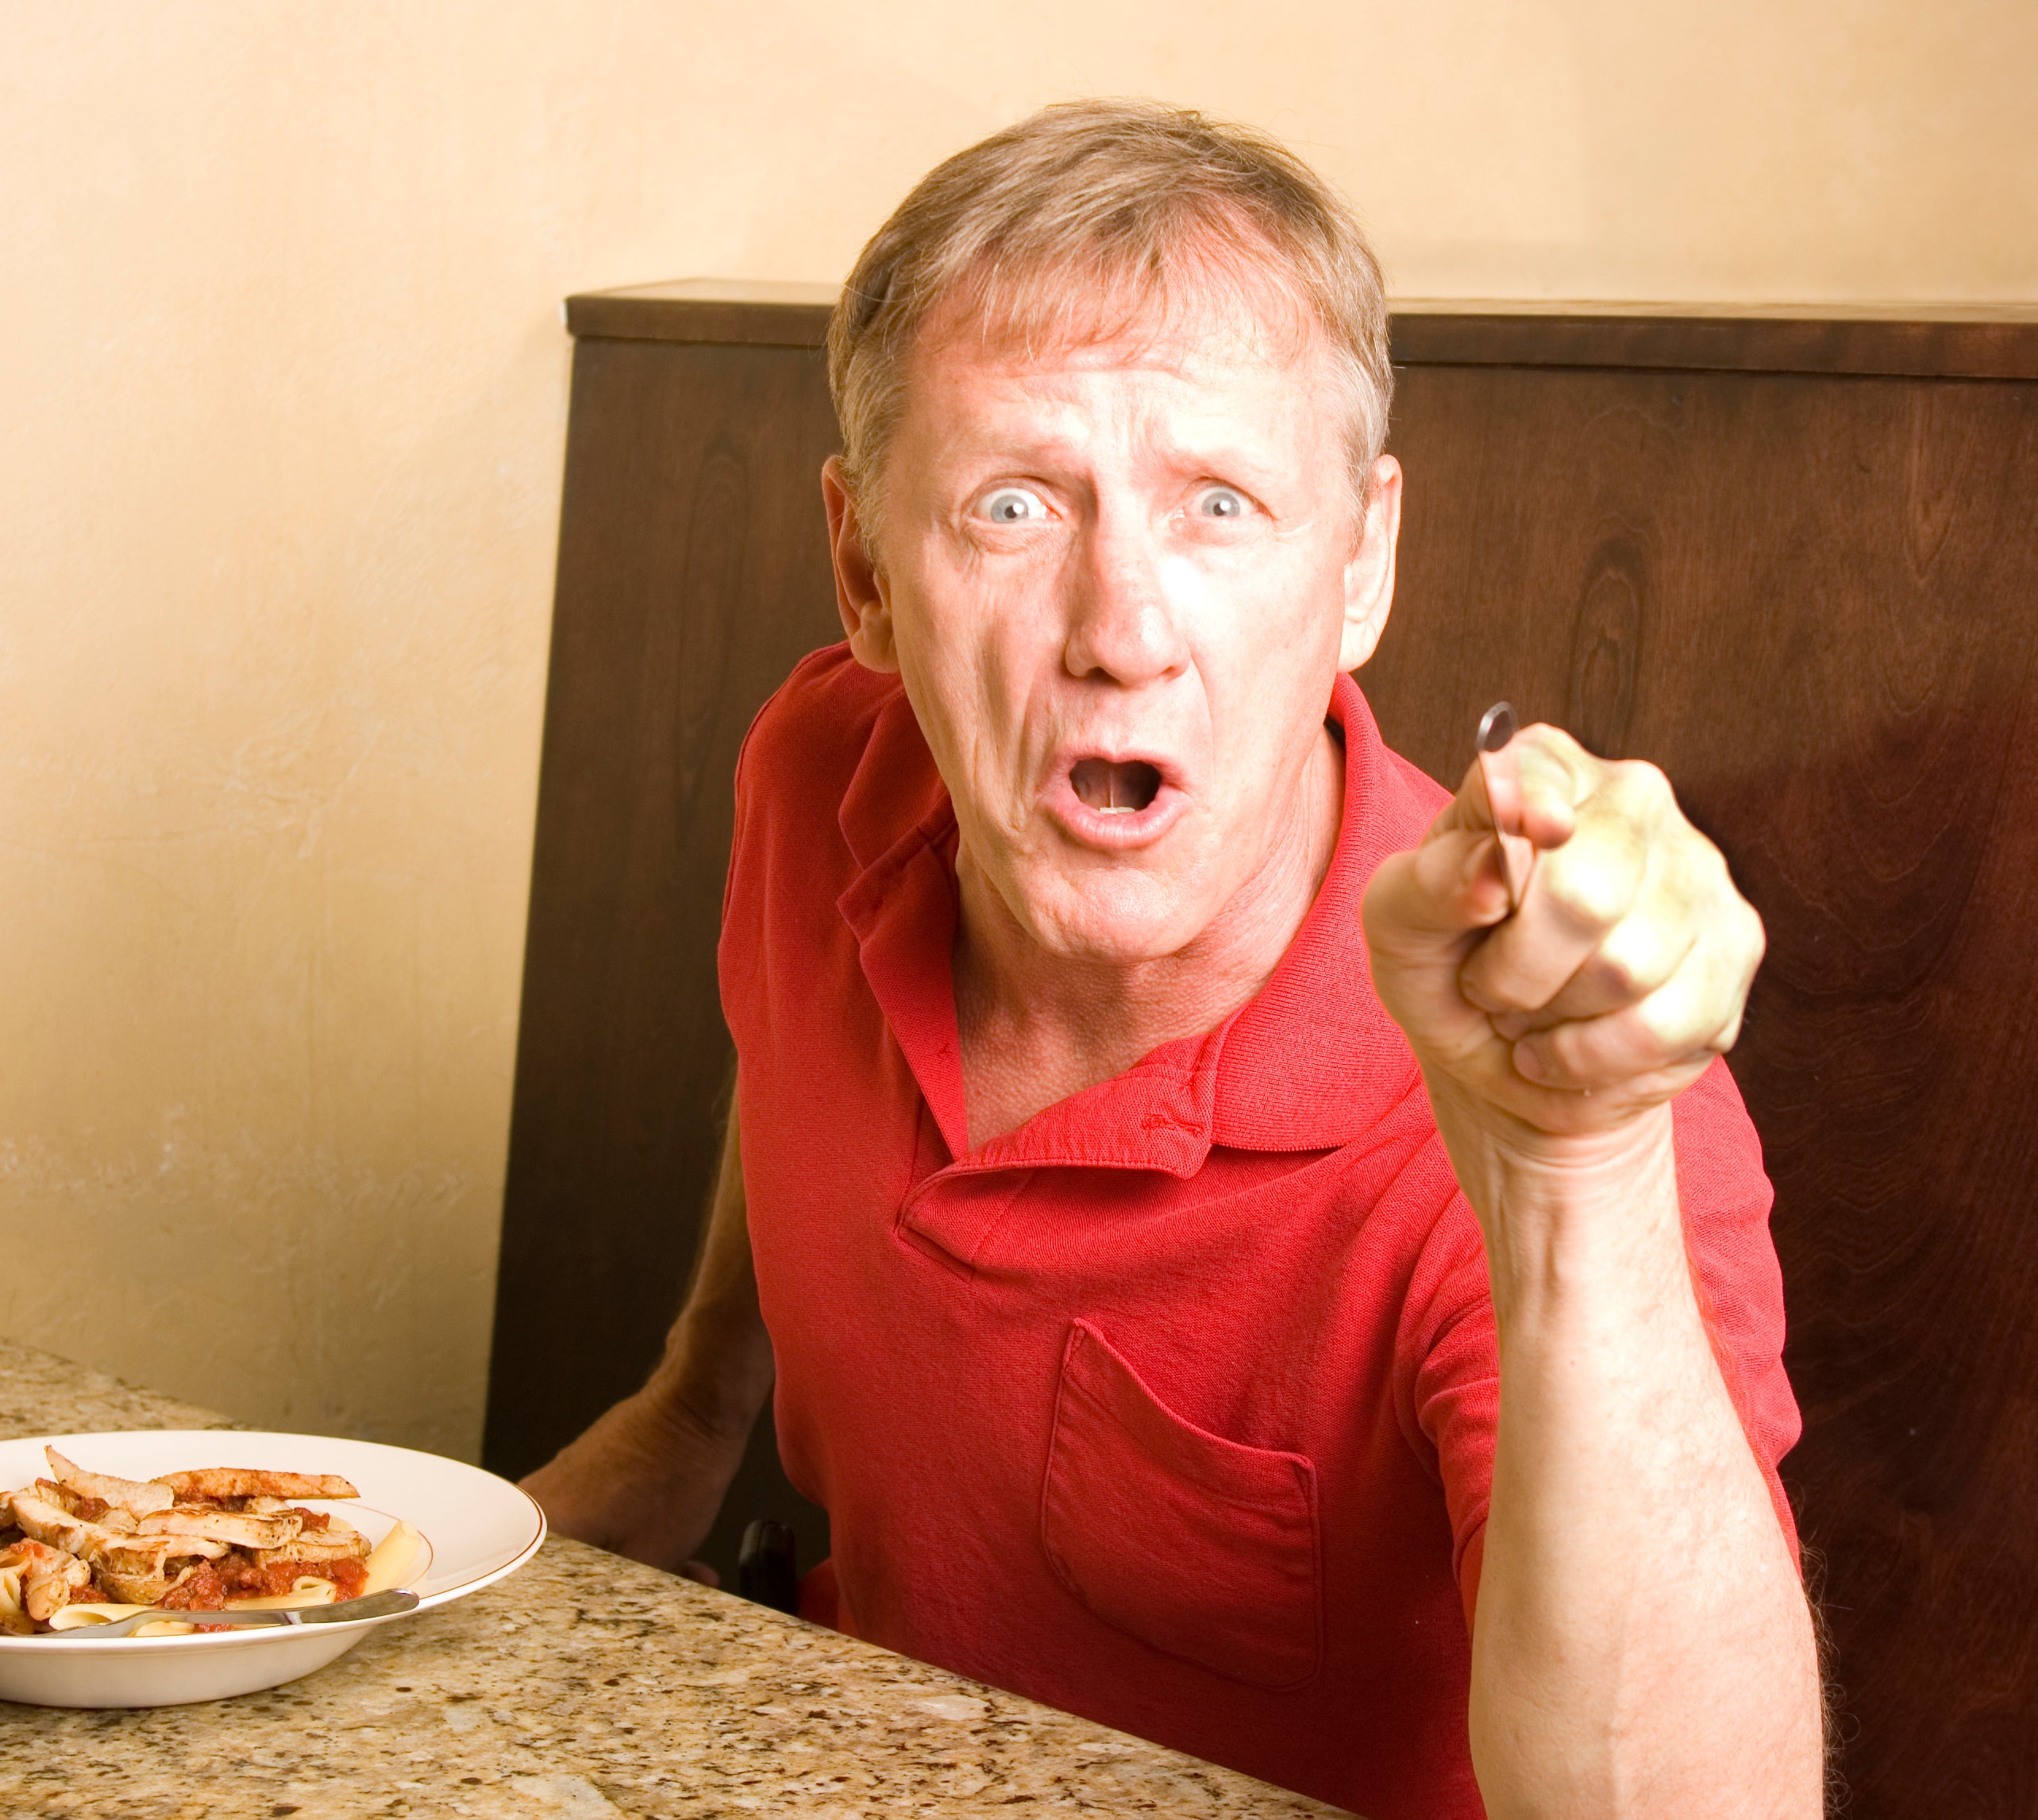 Man gesturing with a fork at a dining table, expressing surprise or excitement